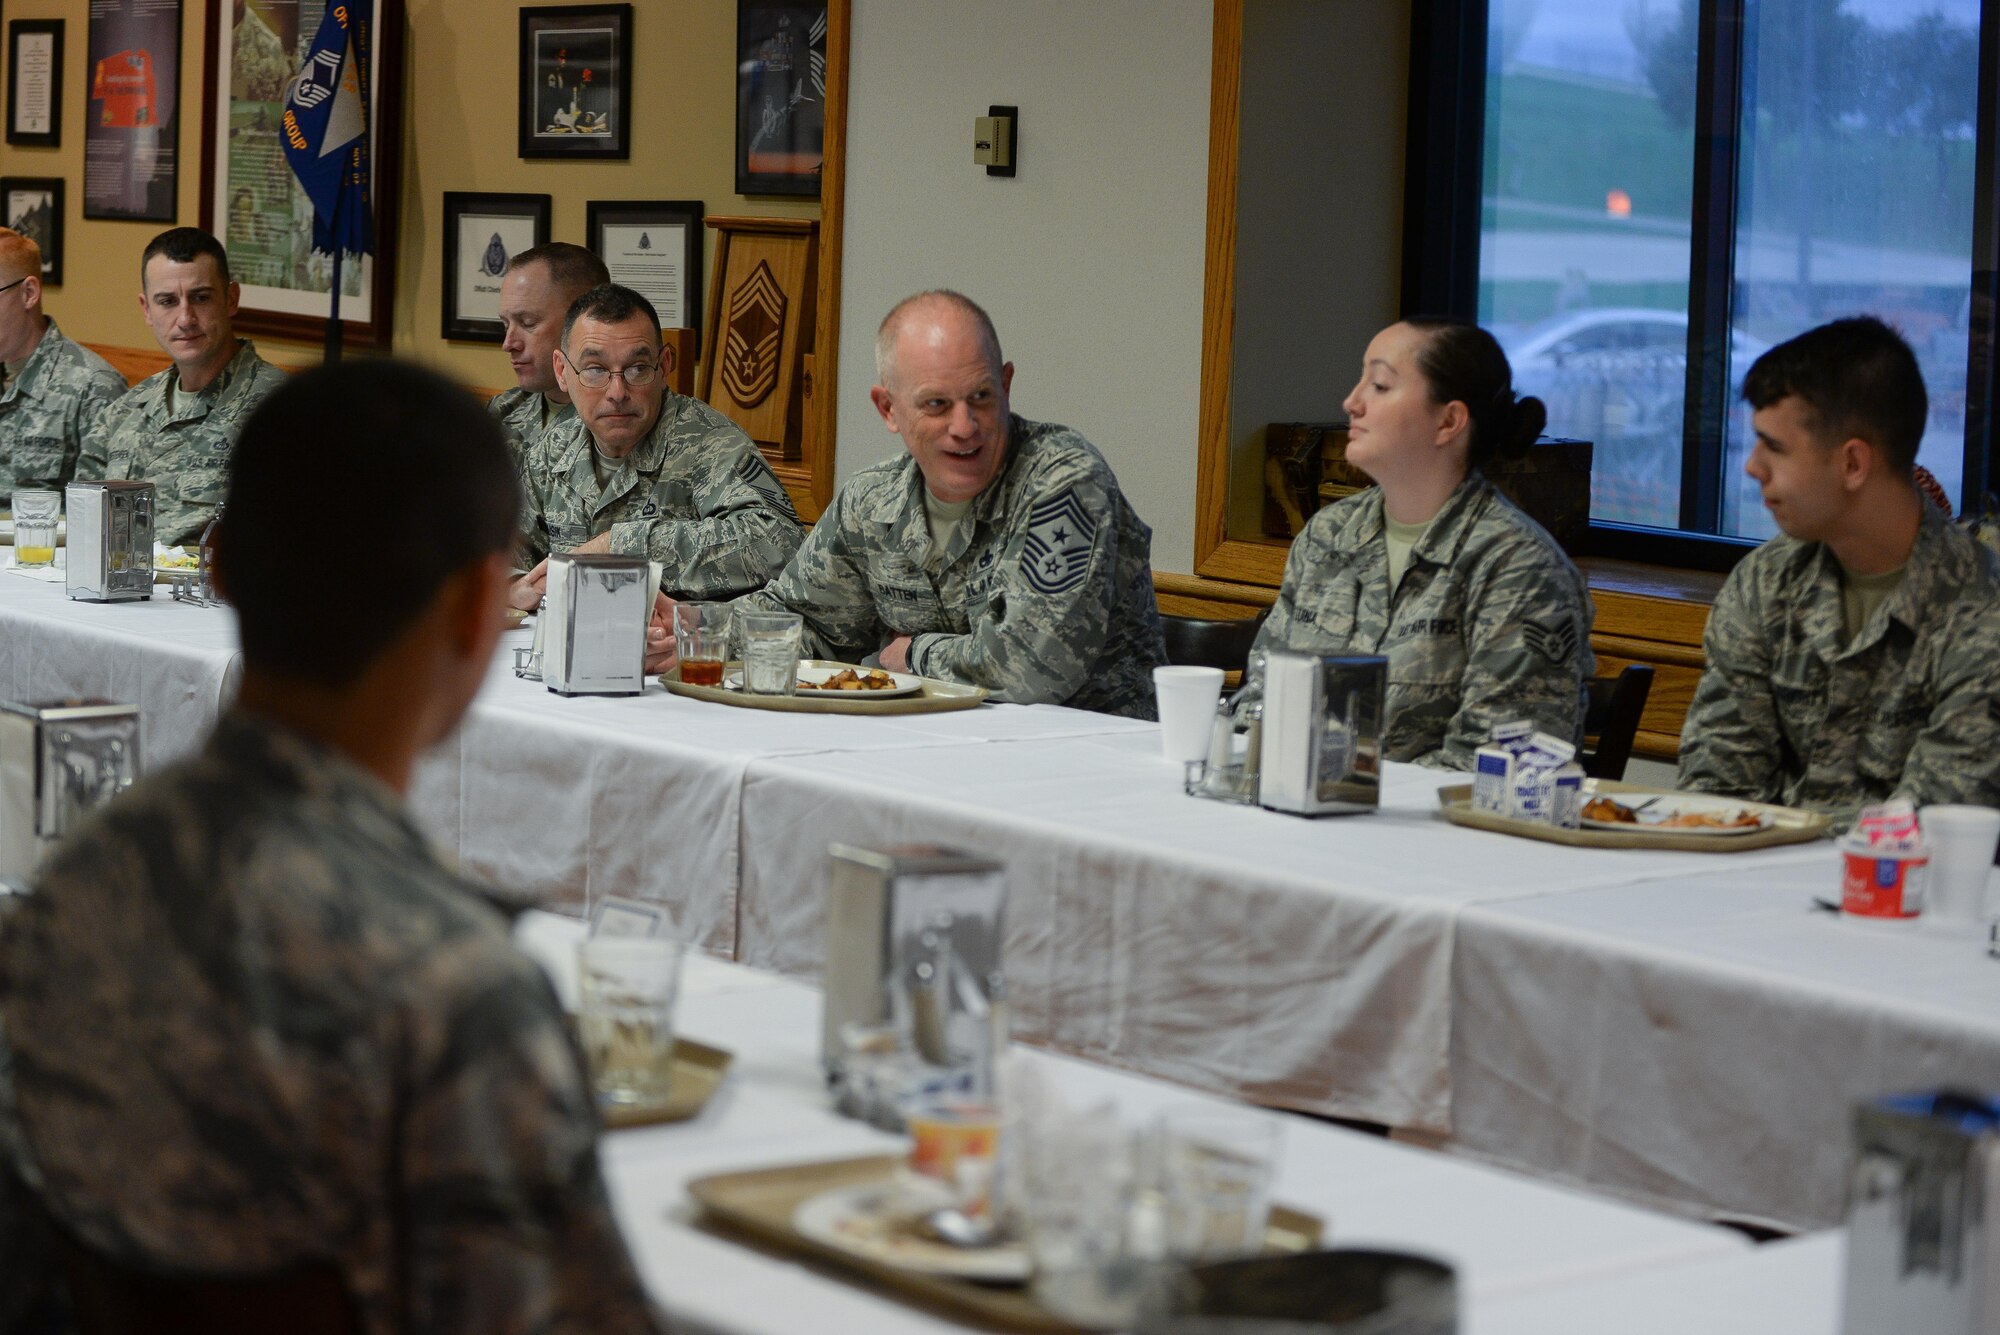 Chief Master Sgt. Frank Batten III, Air Combat Command's command chief, speaks with Airmen from the 557th Weather Wing at the King Dining Facility at Offutt Air Force Base, Oct. 4, 2017. Batten came to Offutt to see and experience all the base had to offer, and to meet the Airmen that drive the mission.